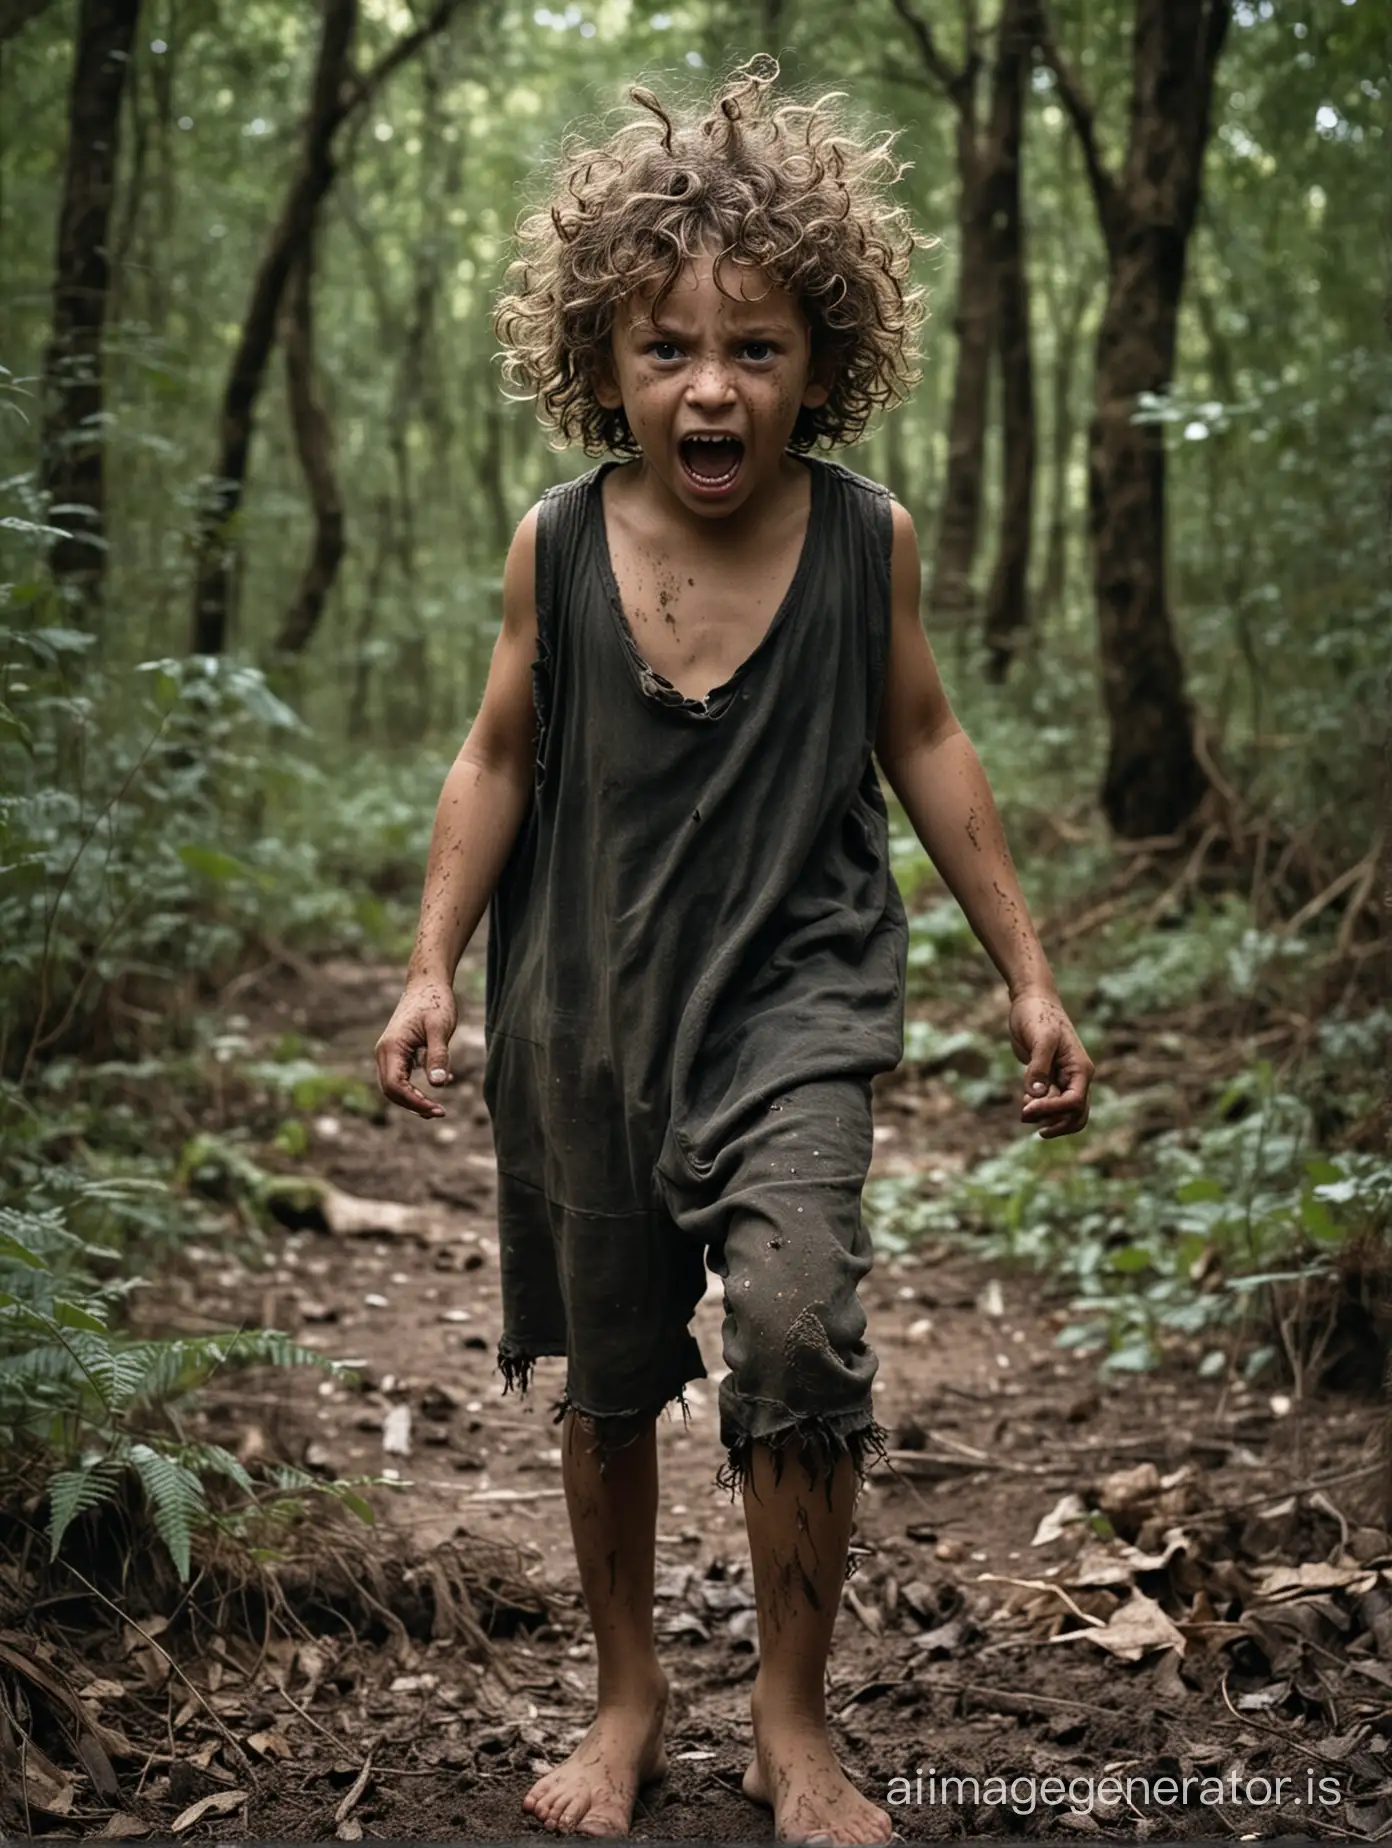 Feral-Child-in-the-1920s-Forest-Screaming-Wild-Kid